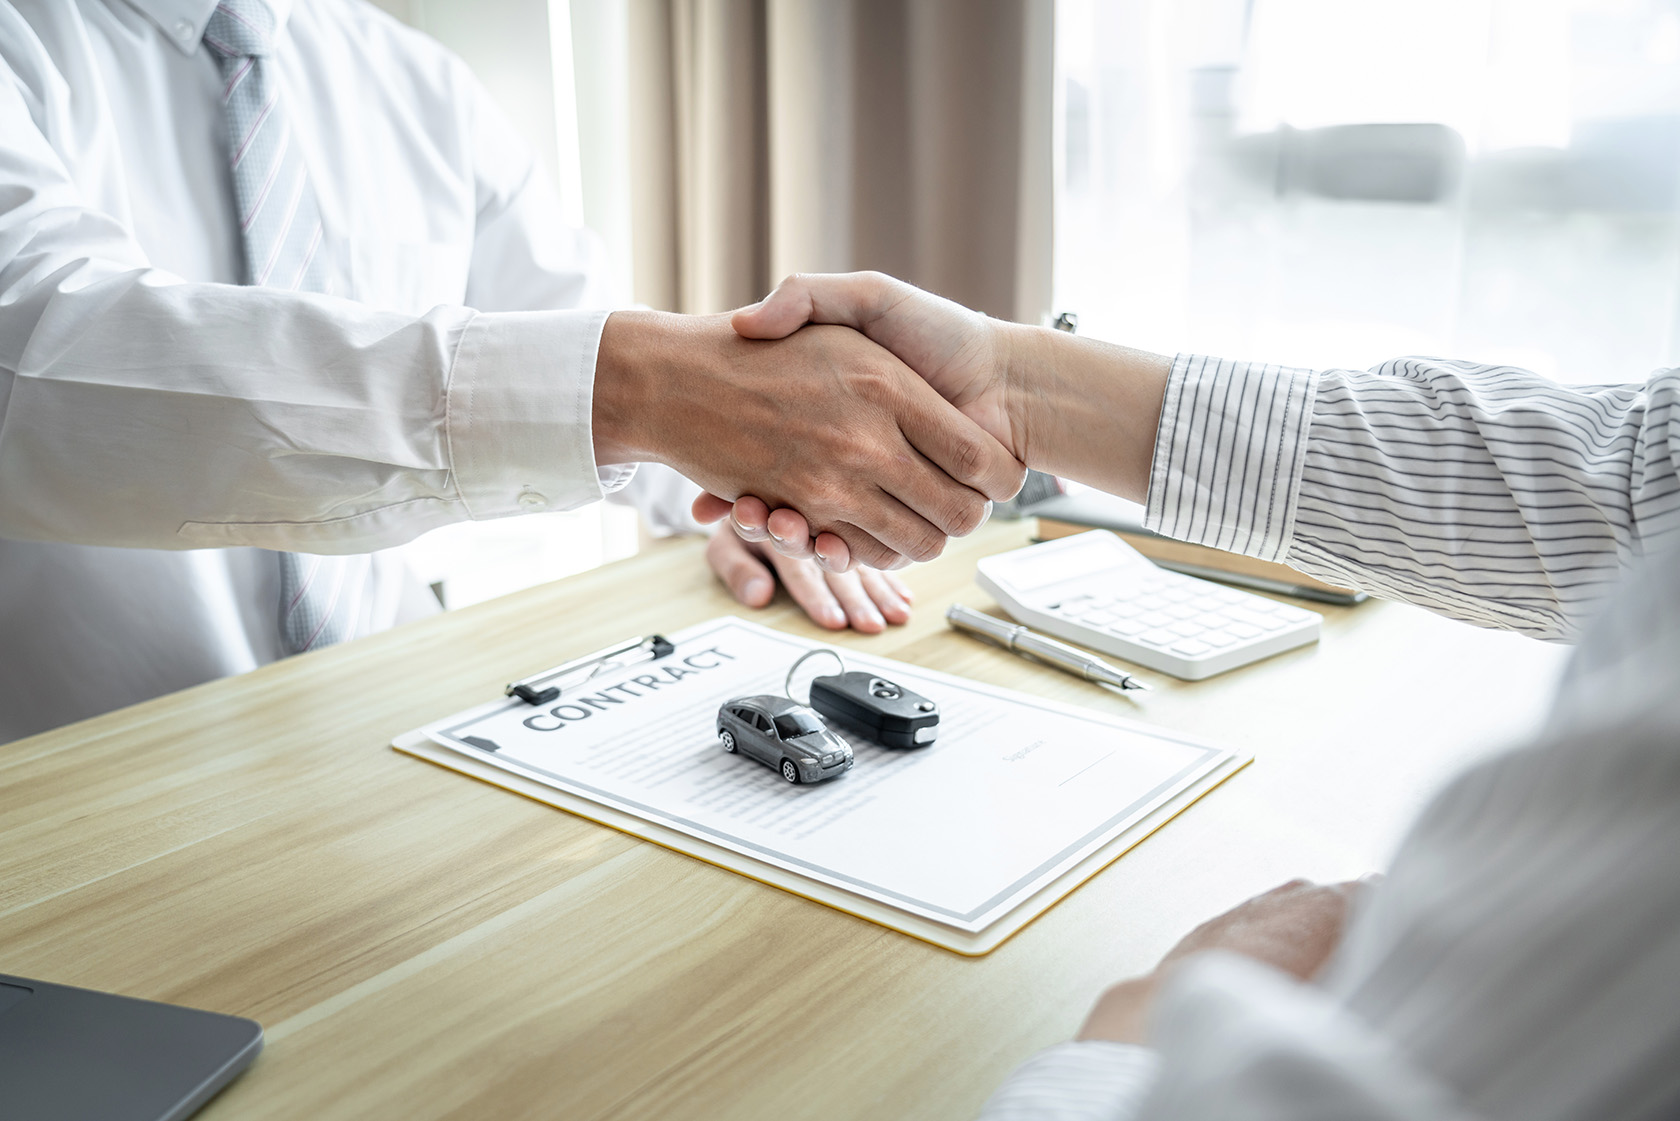 A custoemr and salesman shake hands over a car insurance form